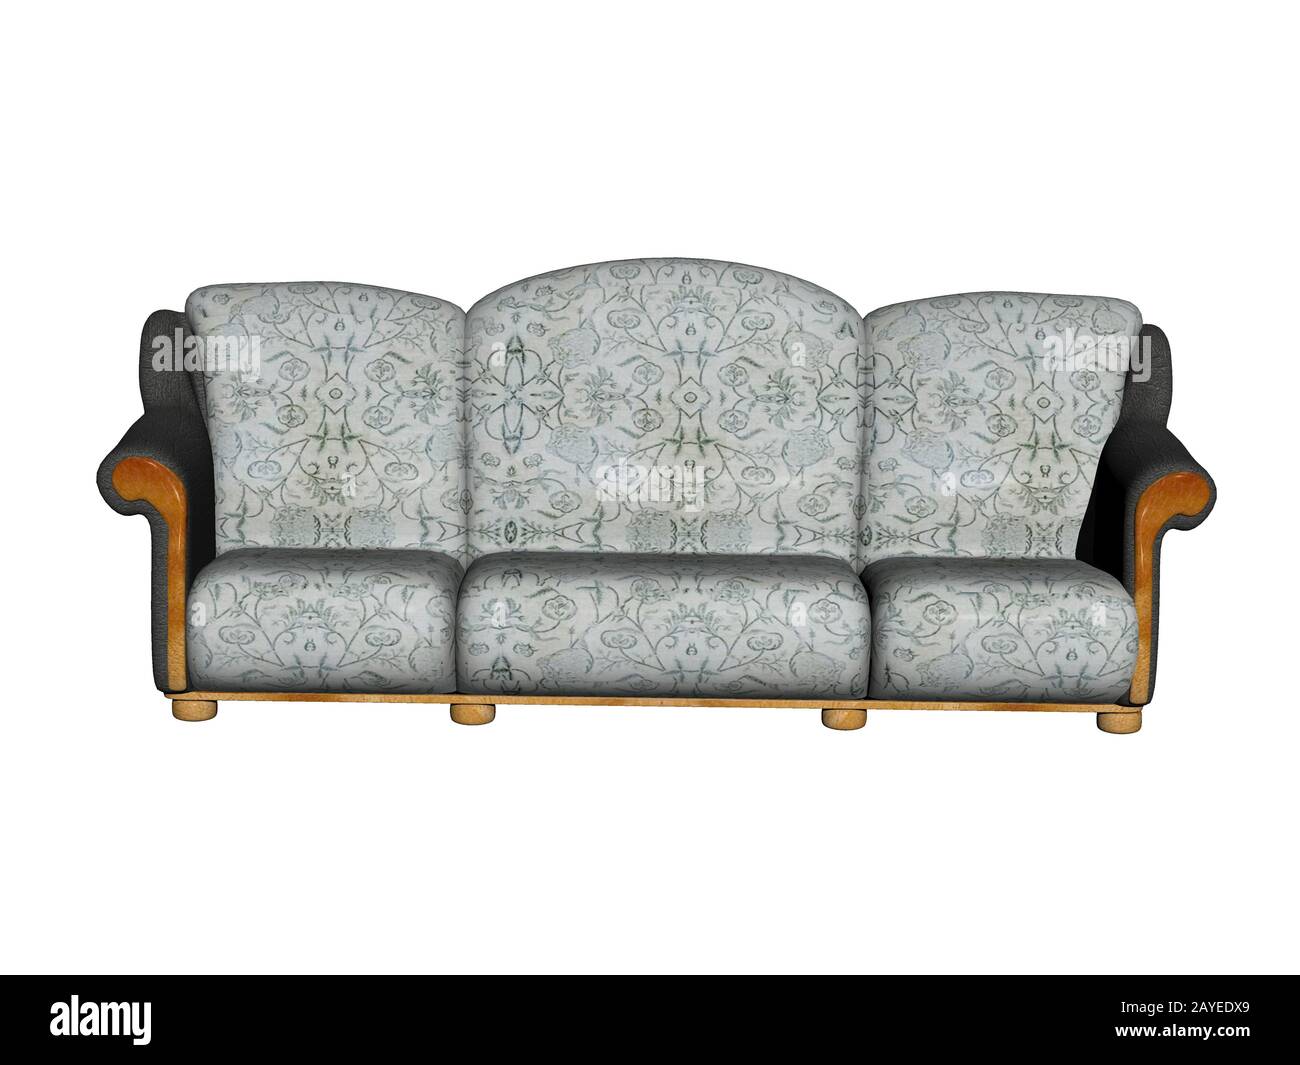 Upholstered furniture made of upholstered furniture Stock Photo